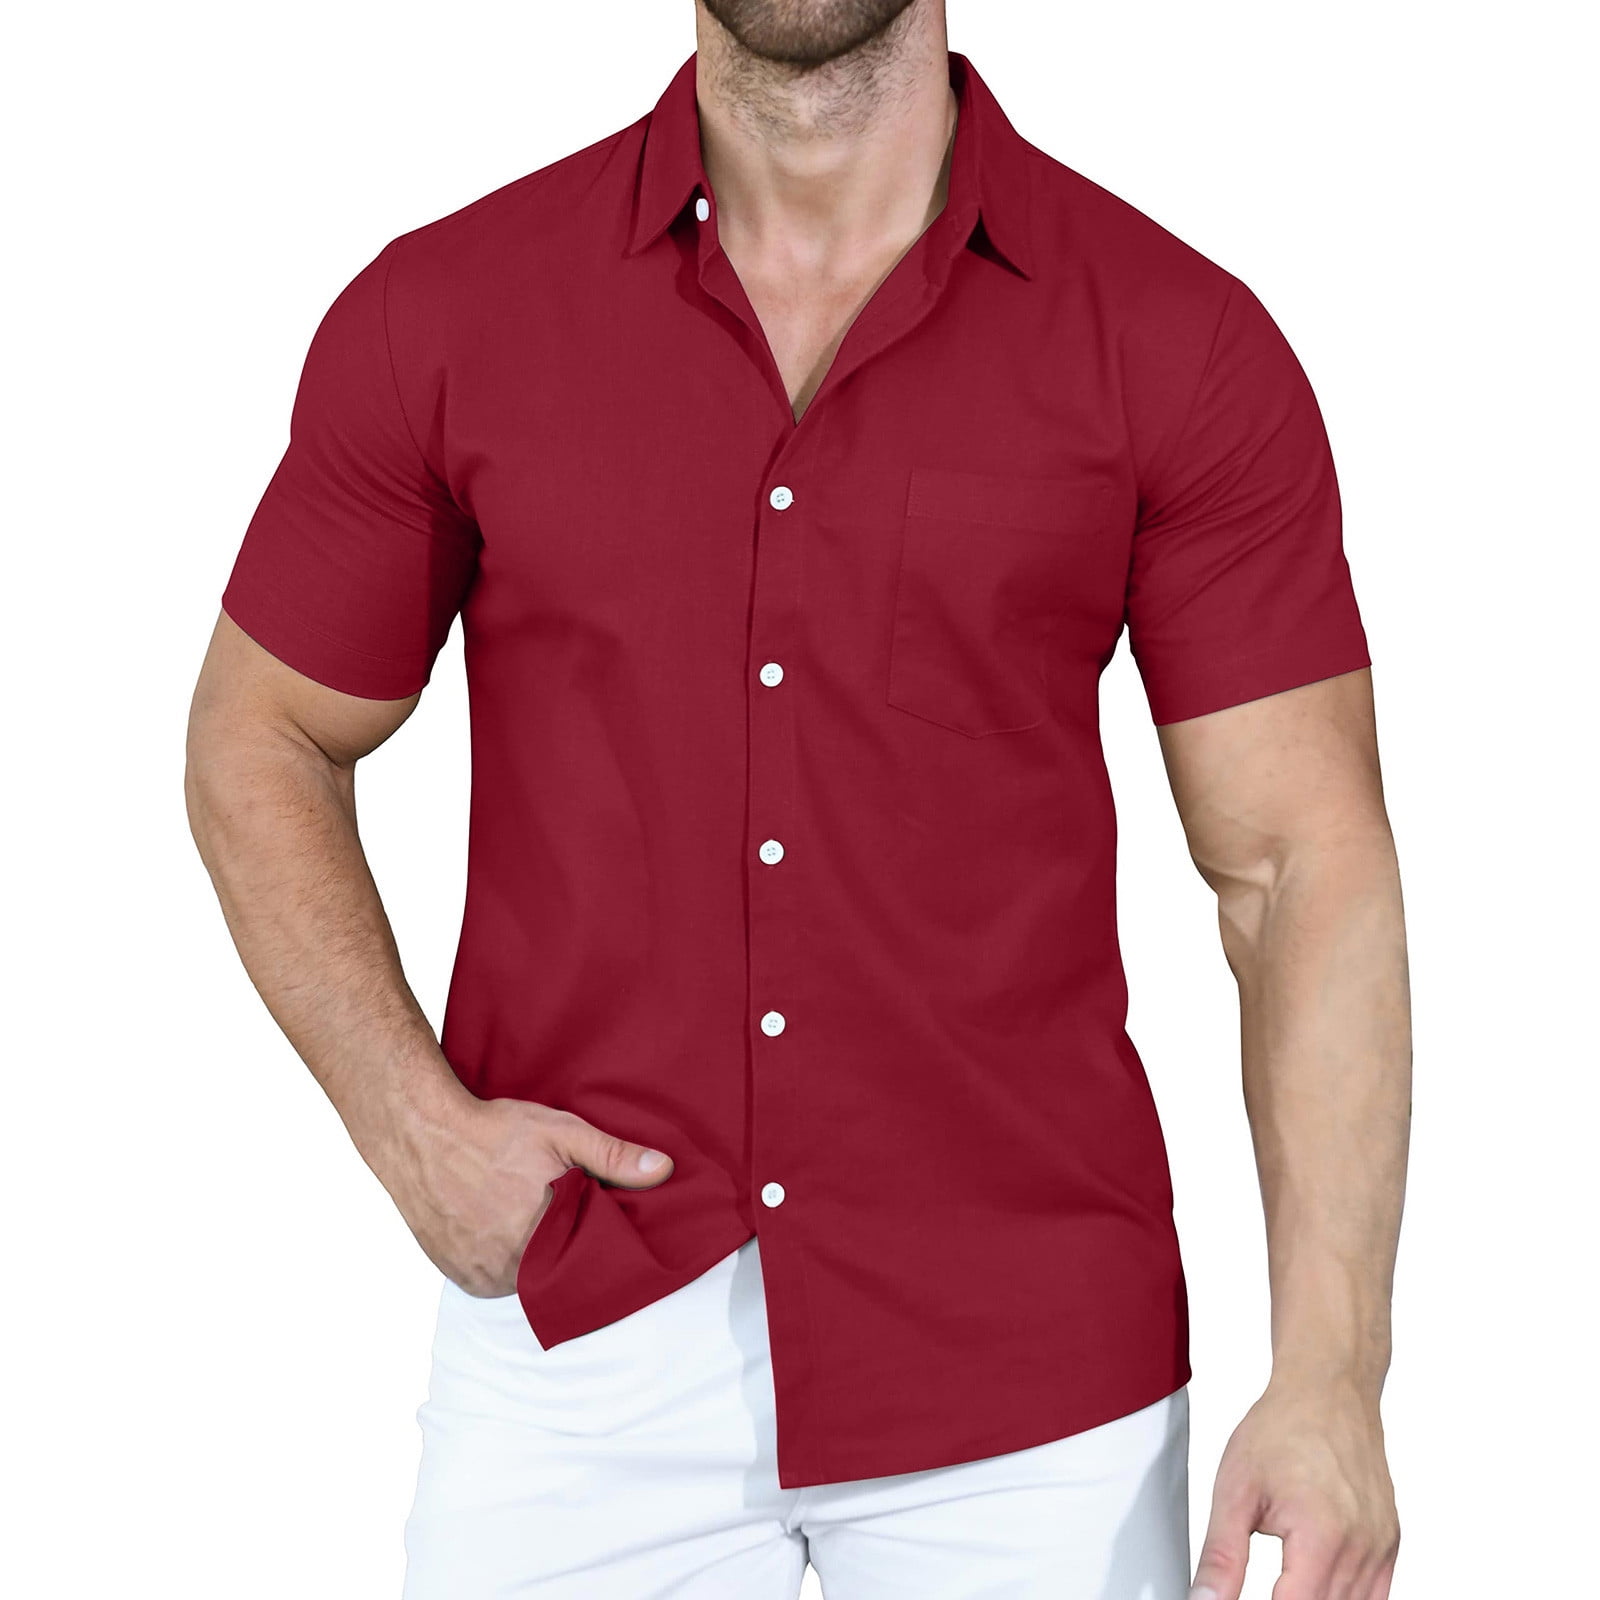 YYDGH Men's Muscle Dress Shirts Slim Fit Stretch Short Sleeve Athletic ...